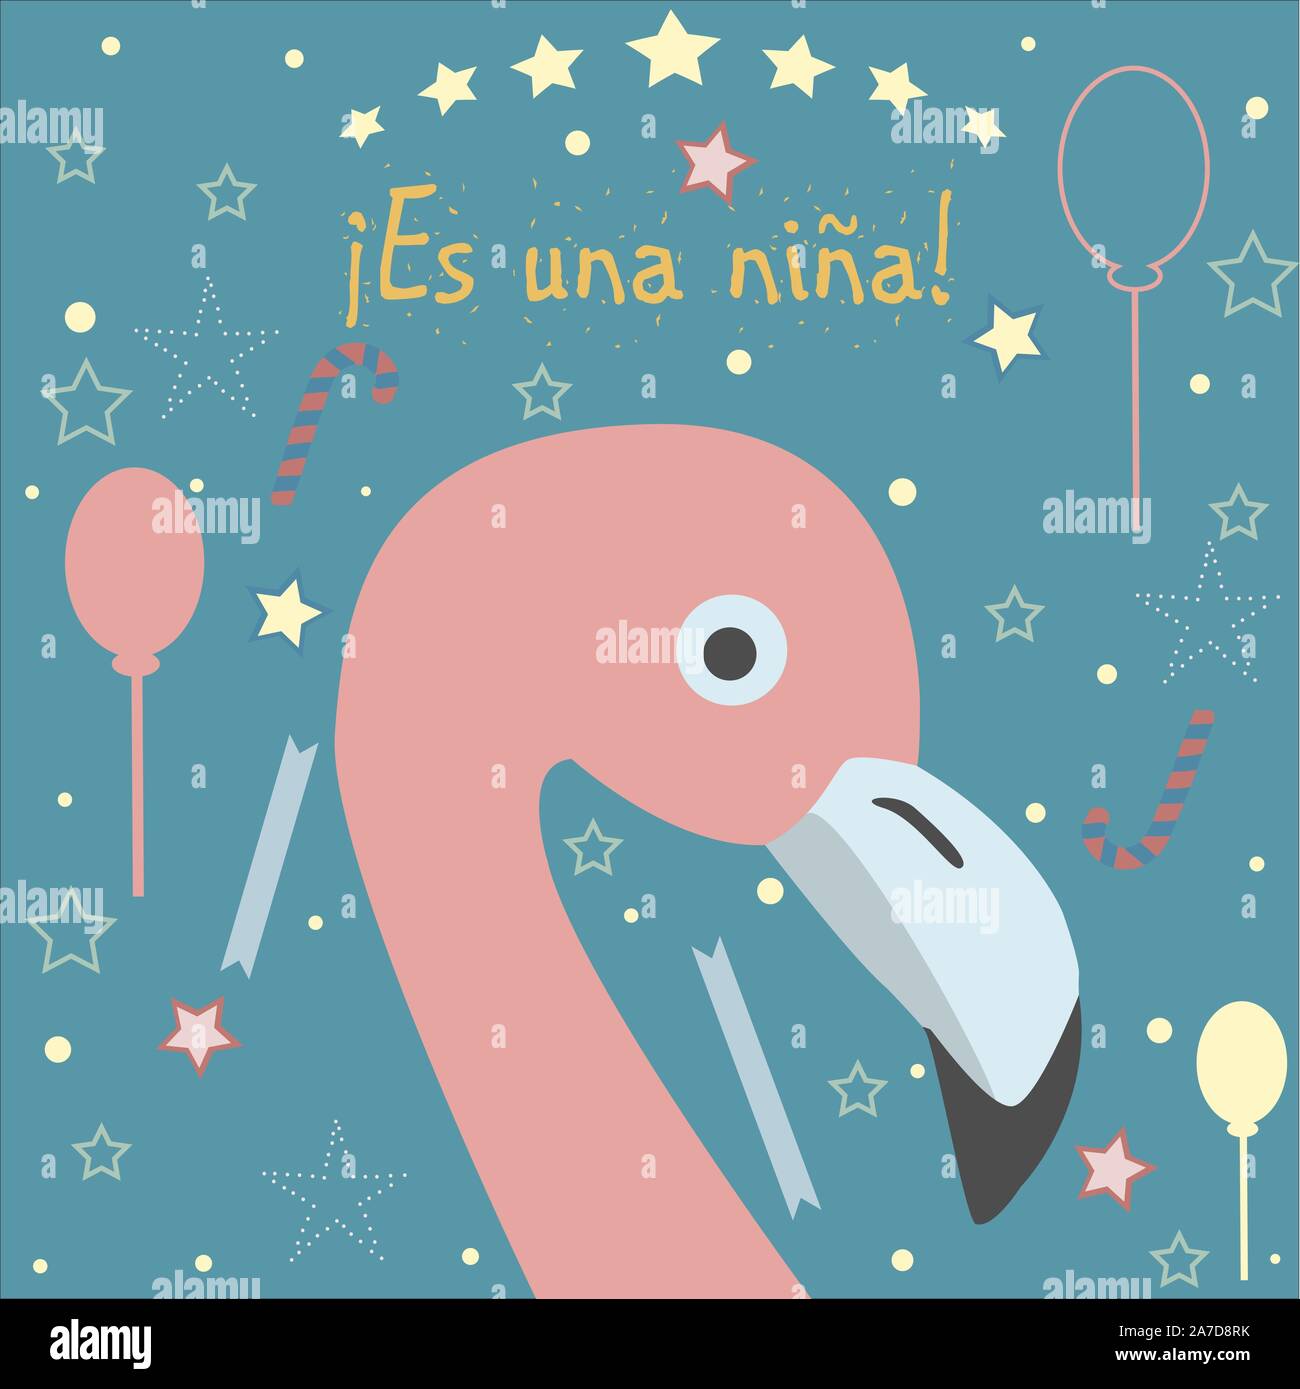 Es Una Nina Means It S A Girl In Spanish Language Baby Girl Birth Announcement Cute Bird Announces The Arrival Of A Baby Girl Stock Vector Image Art Alamy